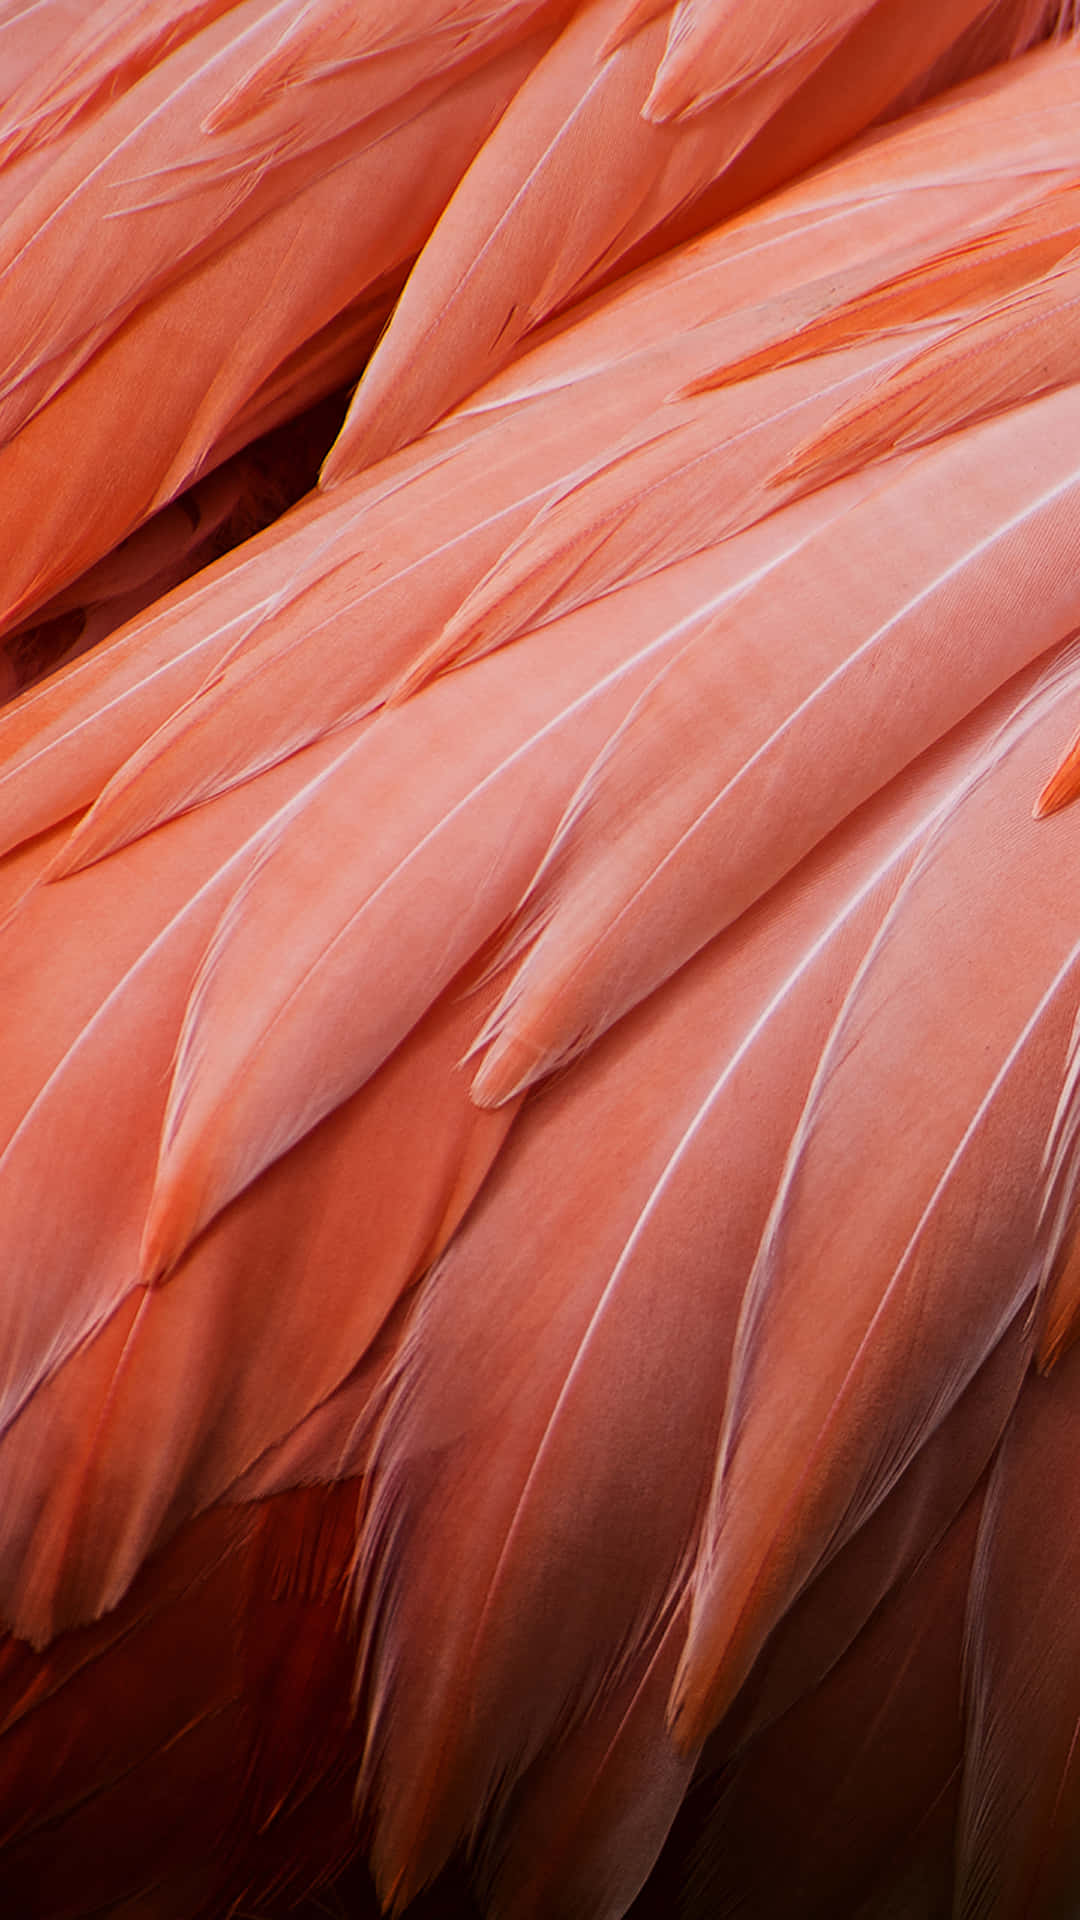 Pink Flamingo Feathers Picture